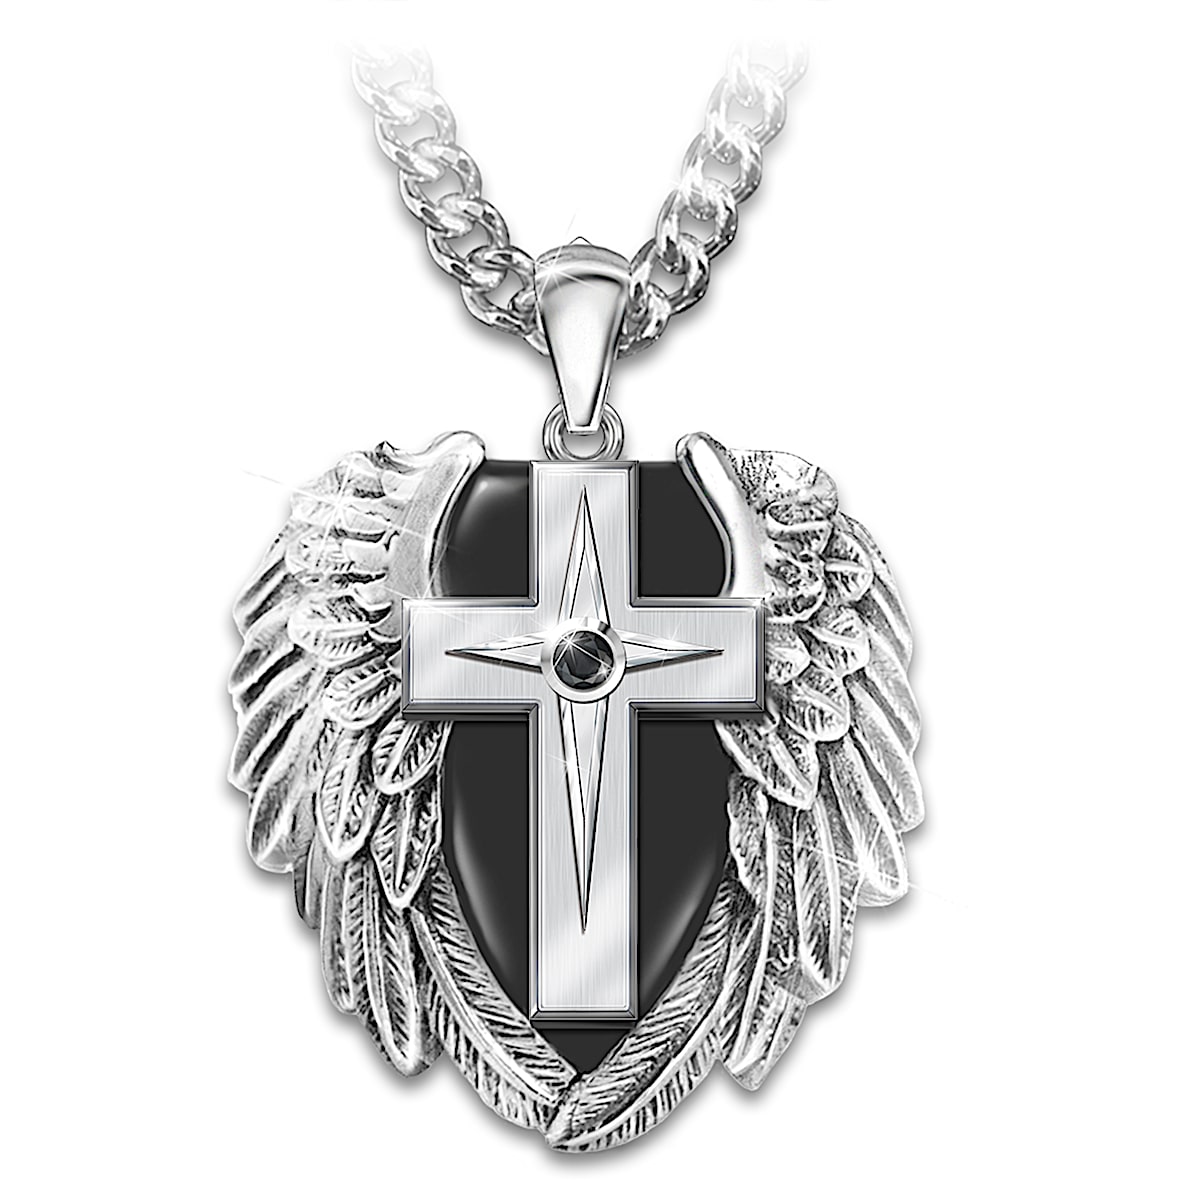 Blessings And Protection For Your Son Religious Pendant Necklace ...